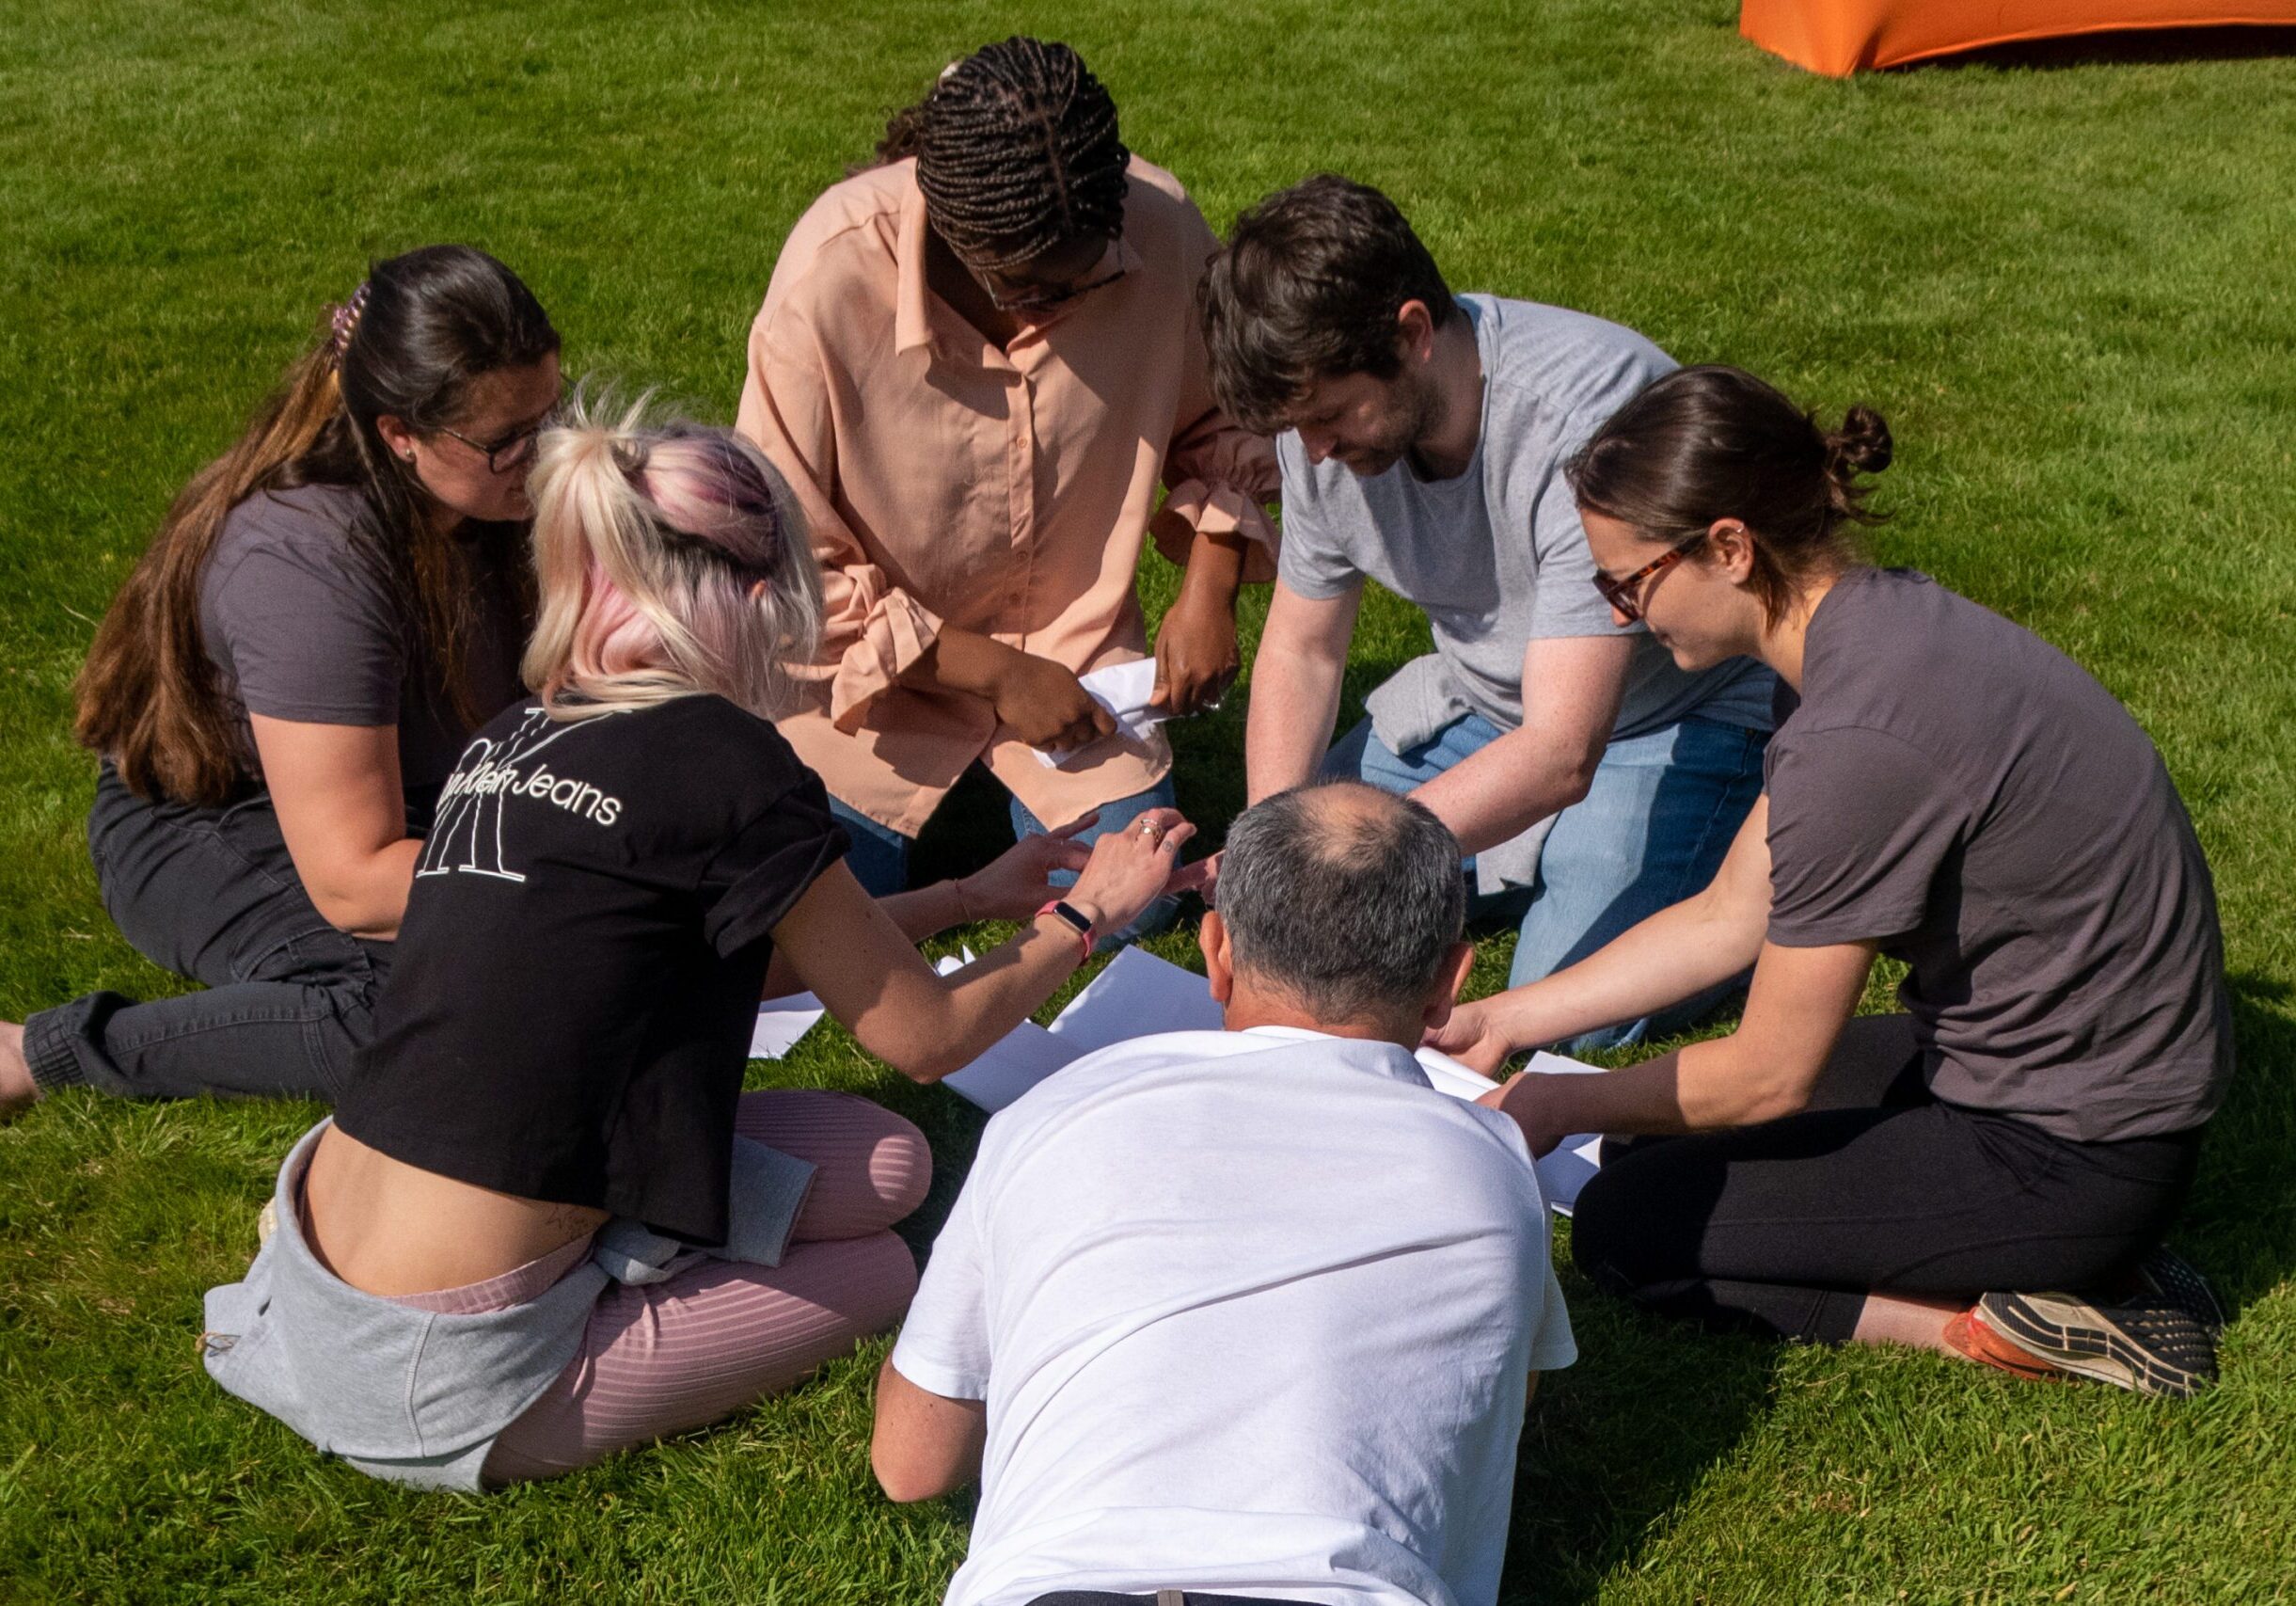 A team of Hyphen8 staff are sat on the grass on a sunny day doing a team building exercise.